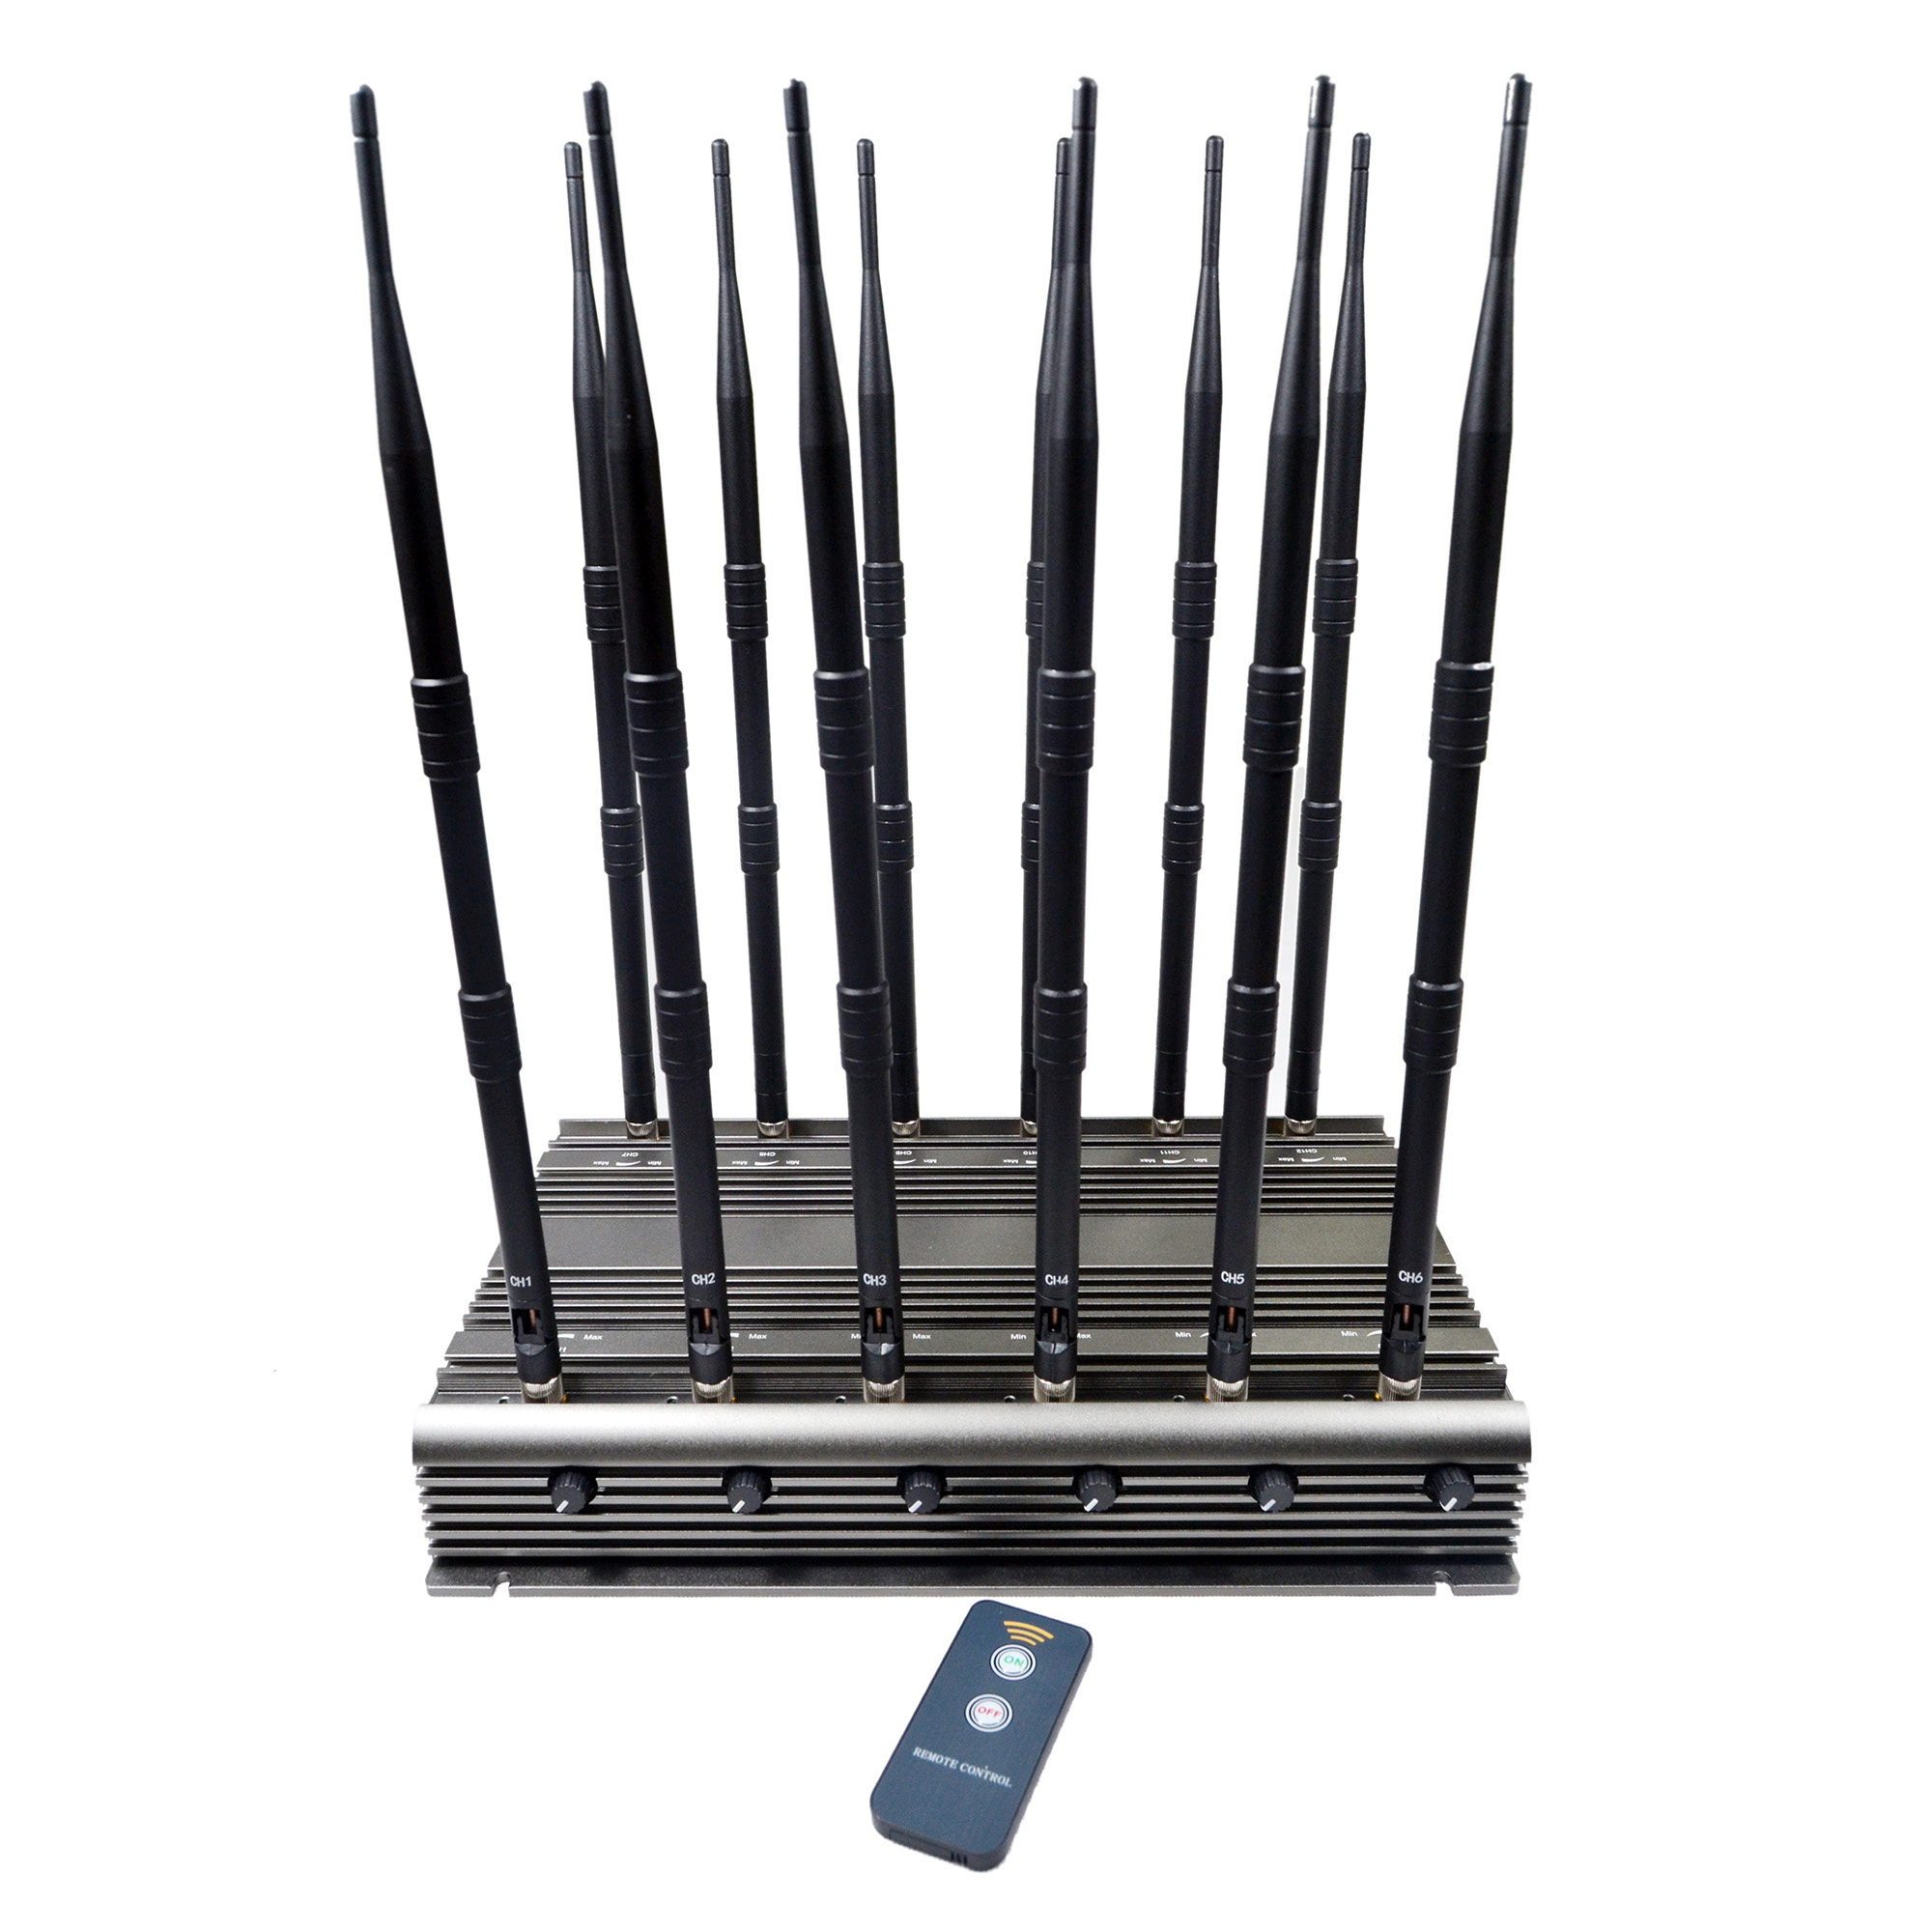 jammer review parturition wiki , New 12 Antennas High Power Mobile Phone 3G 4G 5G Signal Jammer WIFI GPS LOJACK UHF VHF